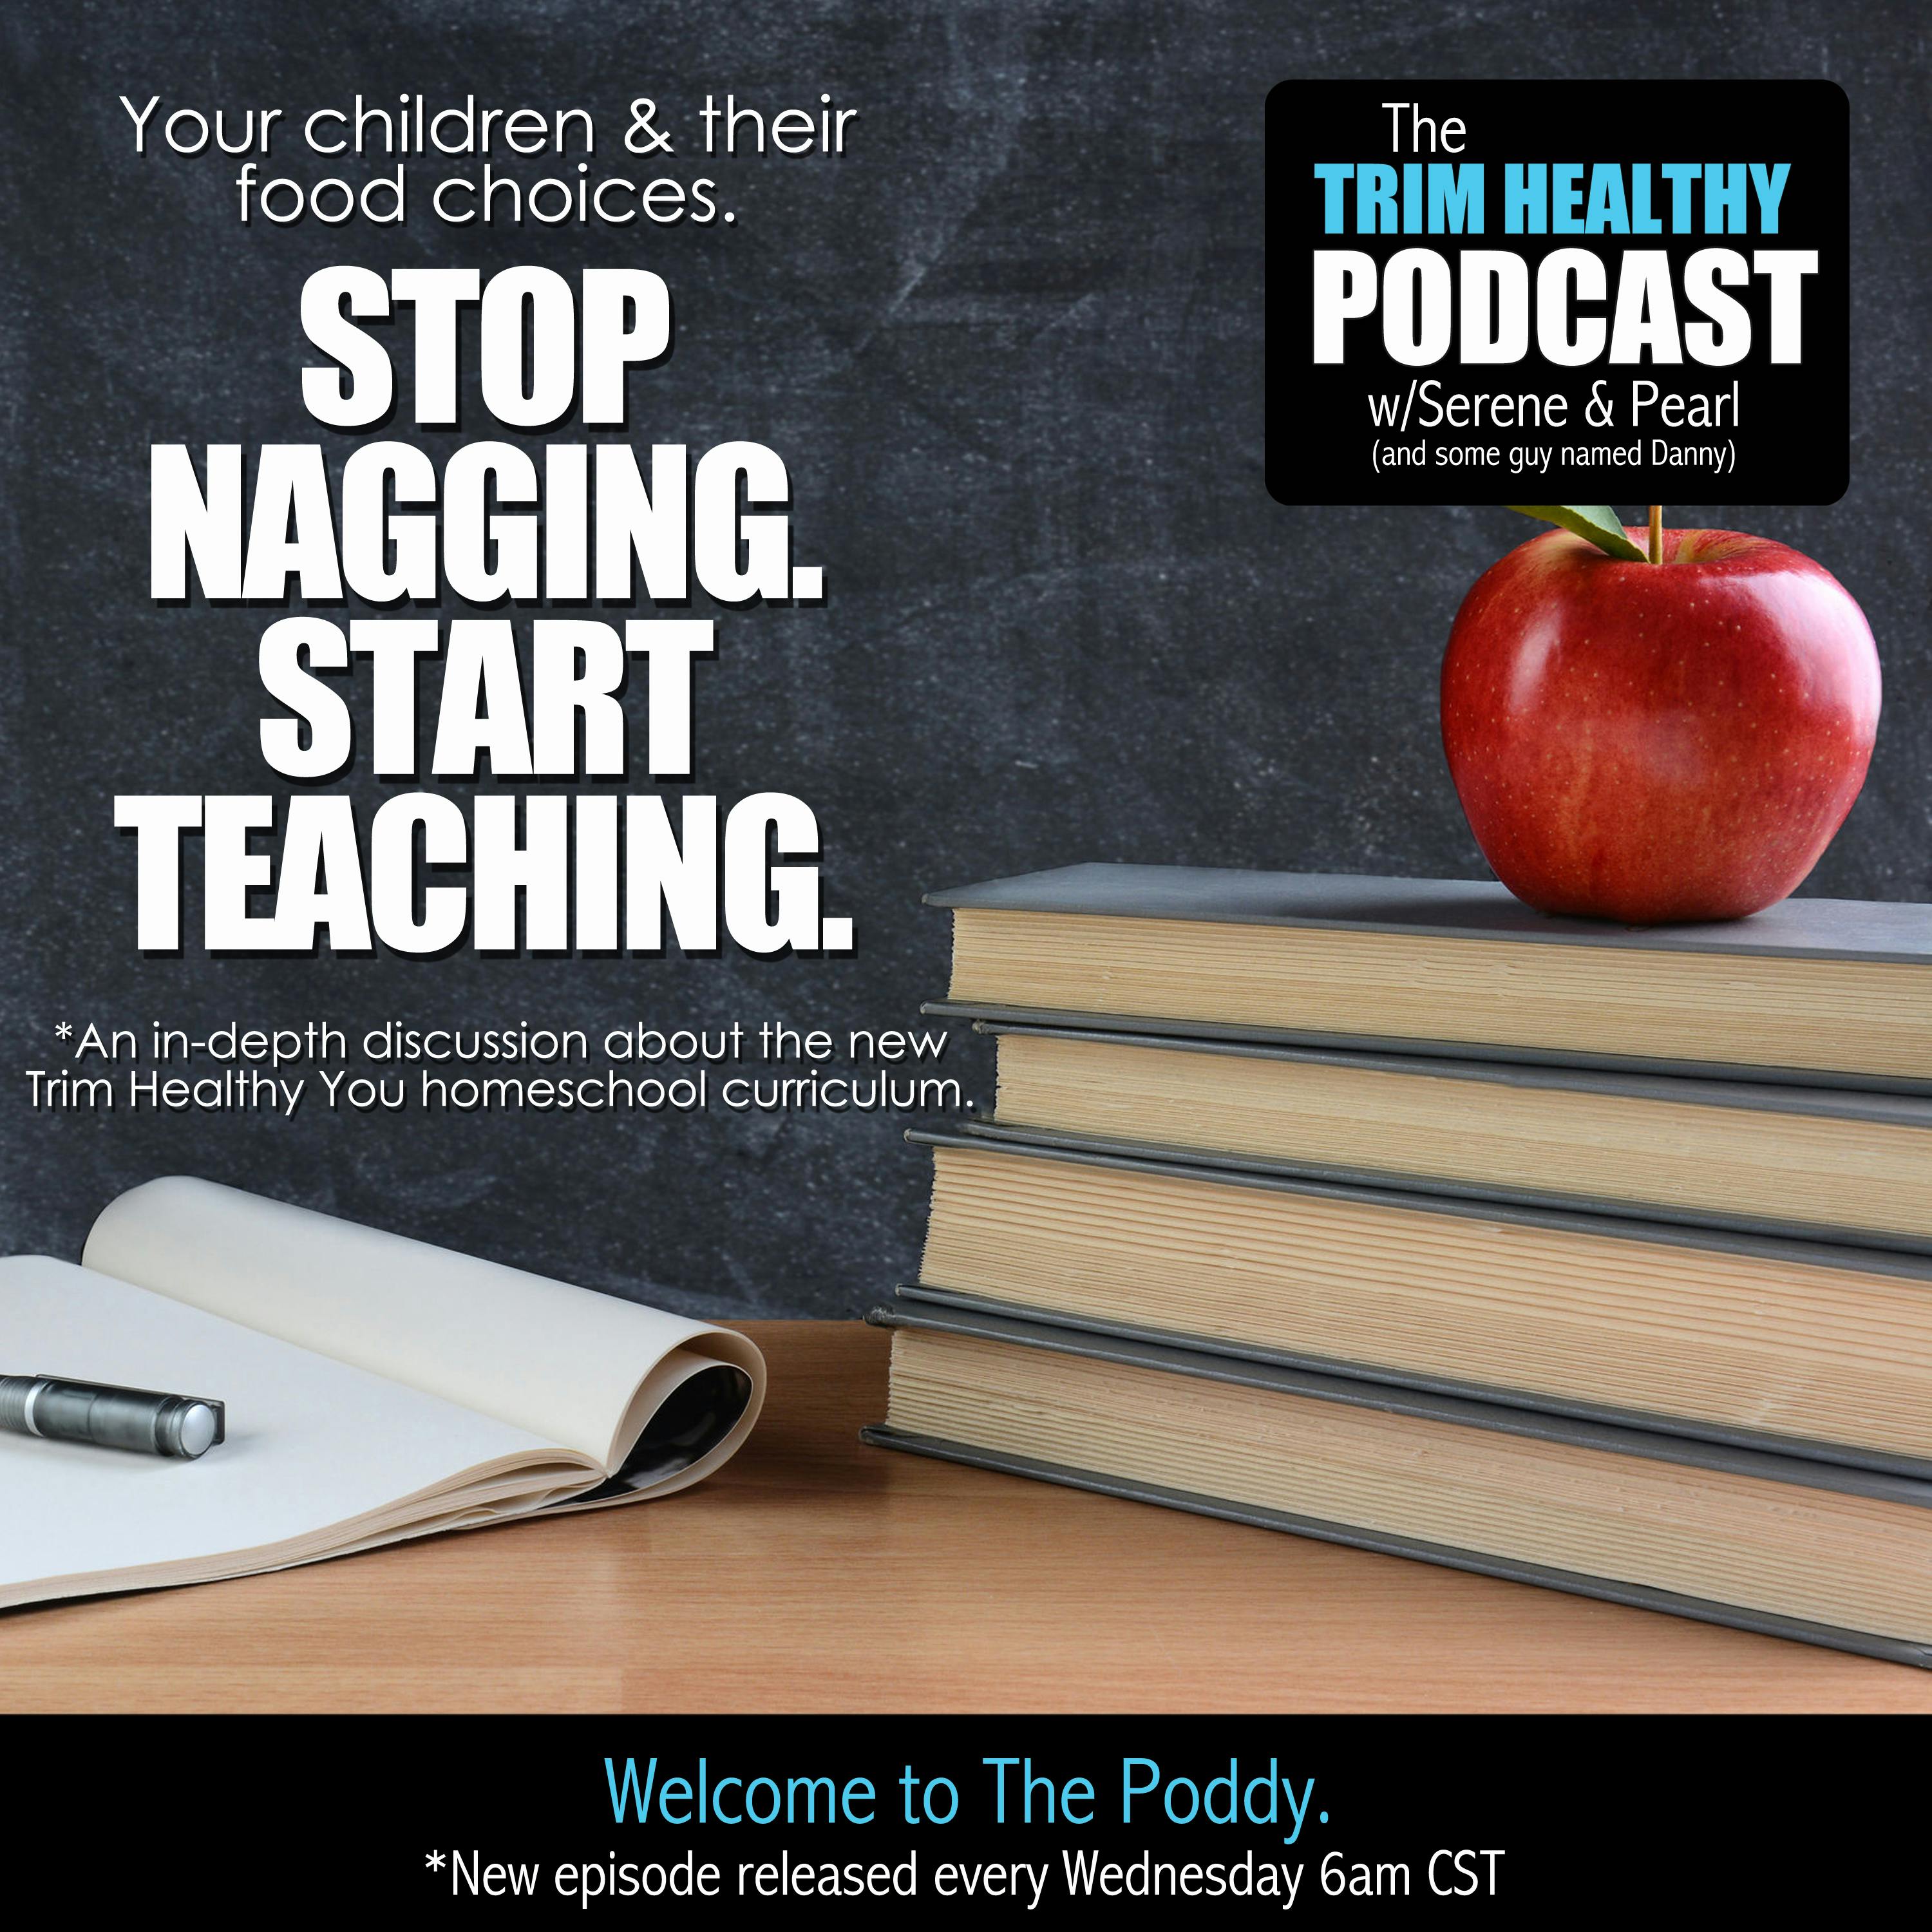 Ep. 132: Your Children & Their Food Choices. Stop Nagging. Start Teaching.